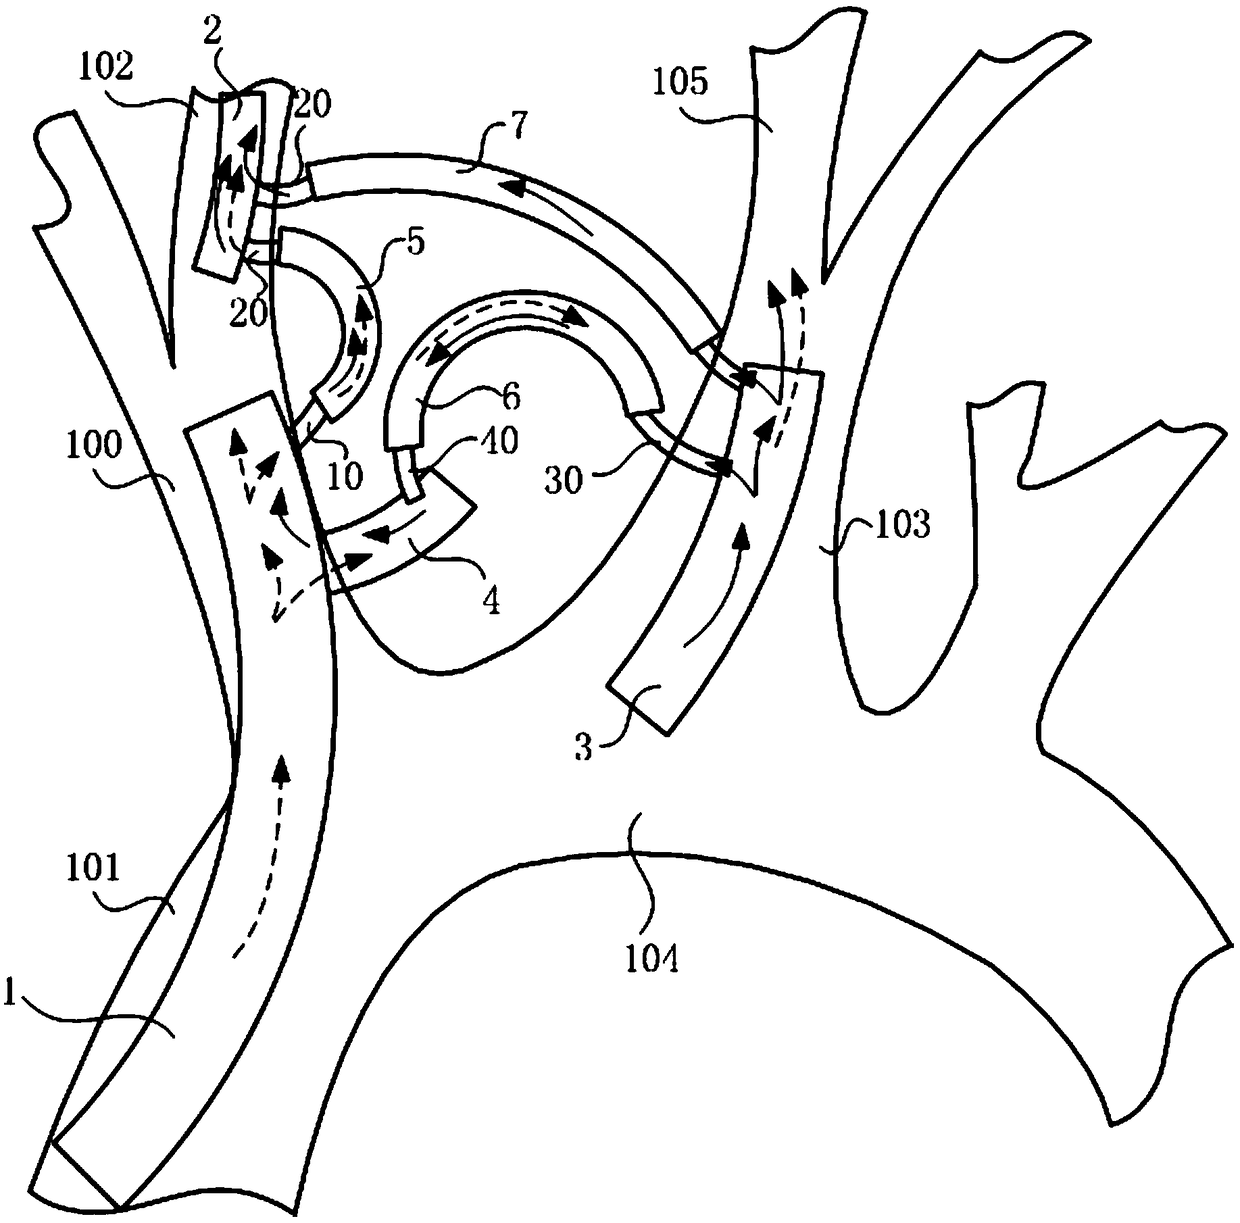 Device for intracranial bypass of aorta and bilateral internal carotid arteries